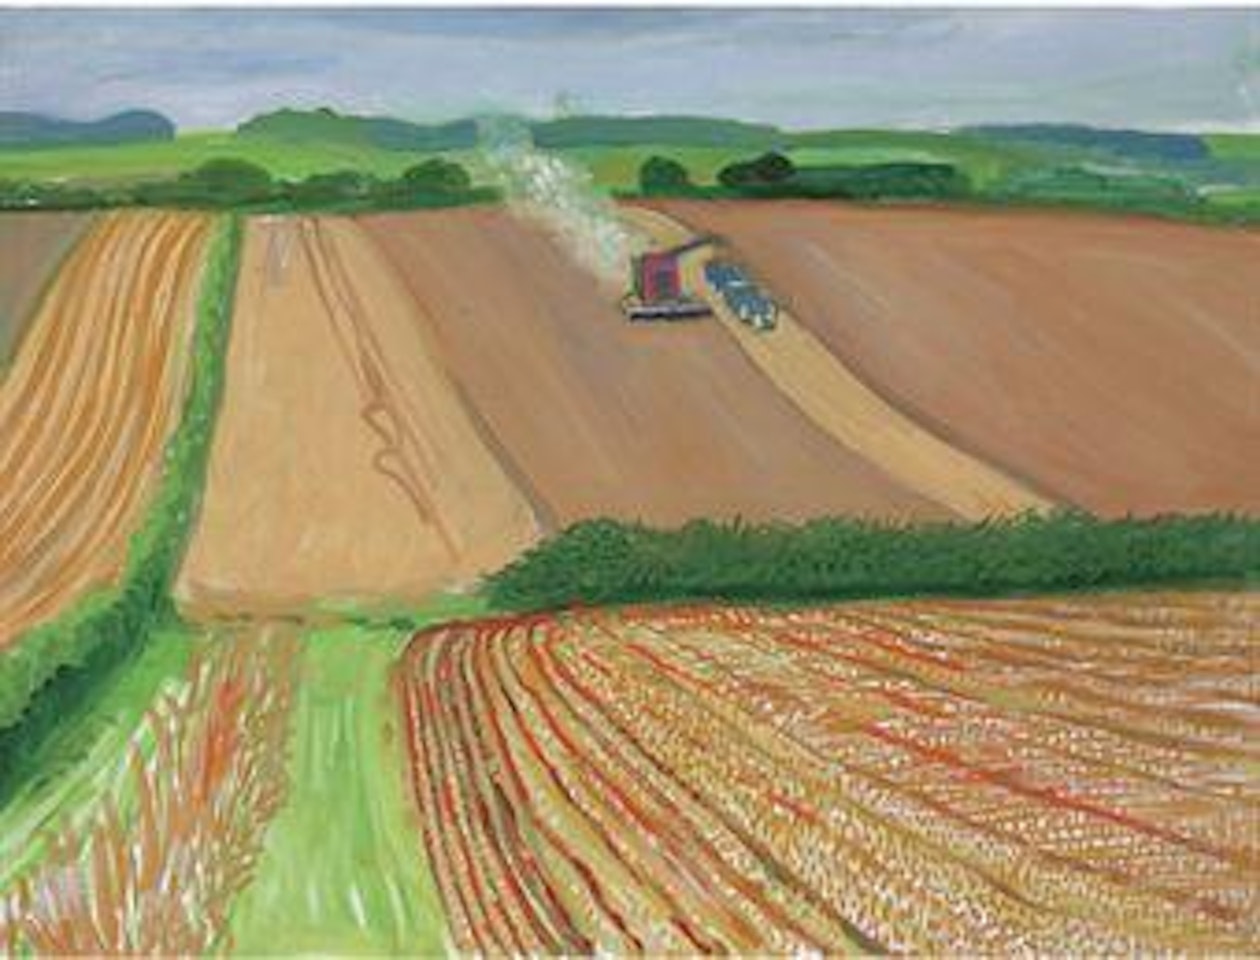 Harvesting Near The Road To Thwing by David Hockney